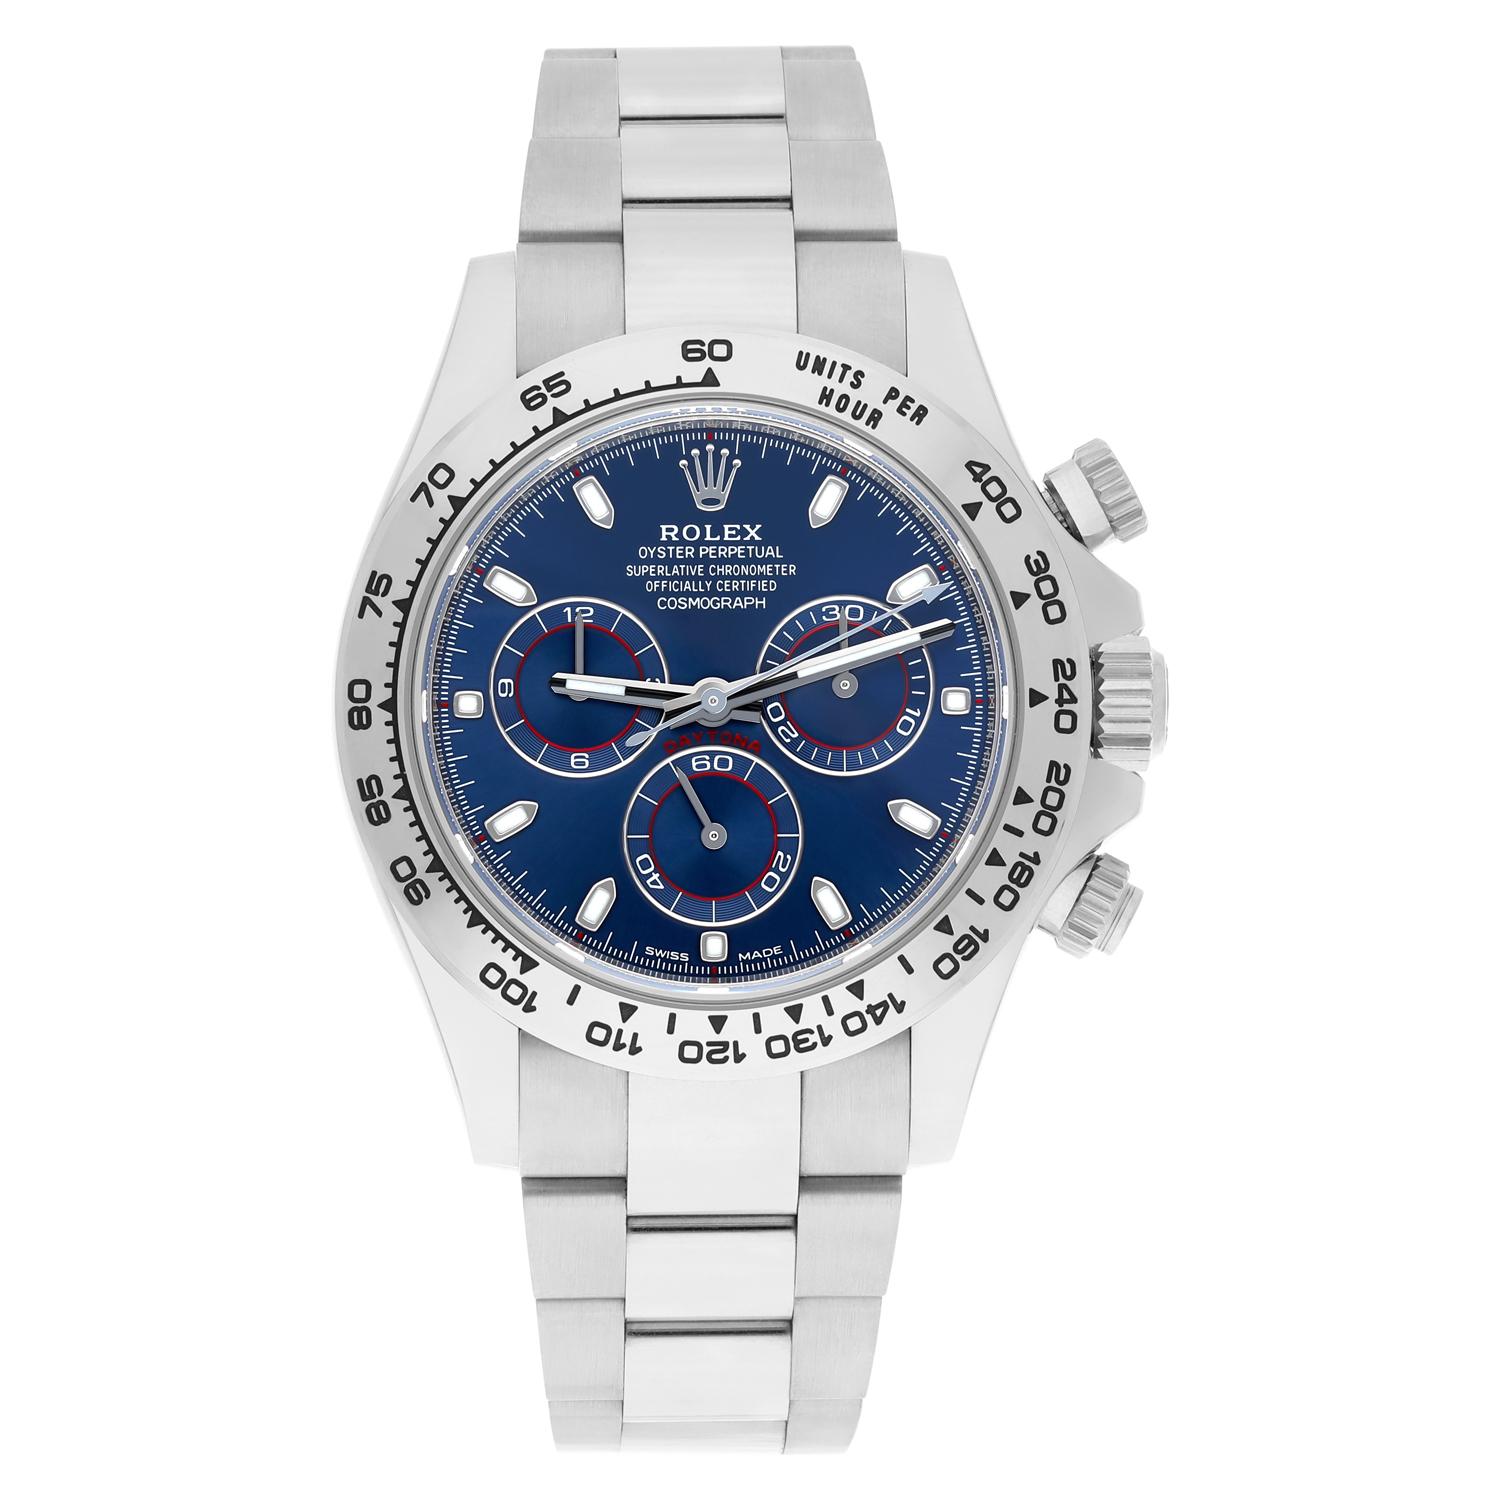 Rolex Cosmograph Daytona White Gold 40mm Blue Dial 116509 Complete 2018

This rare discontinued 18kt white gold Cosmograph Daytona ref. 116509 with highly attractive blue dial, is one of the most sought-after in Rolex's collection. As supply is